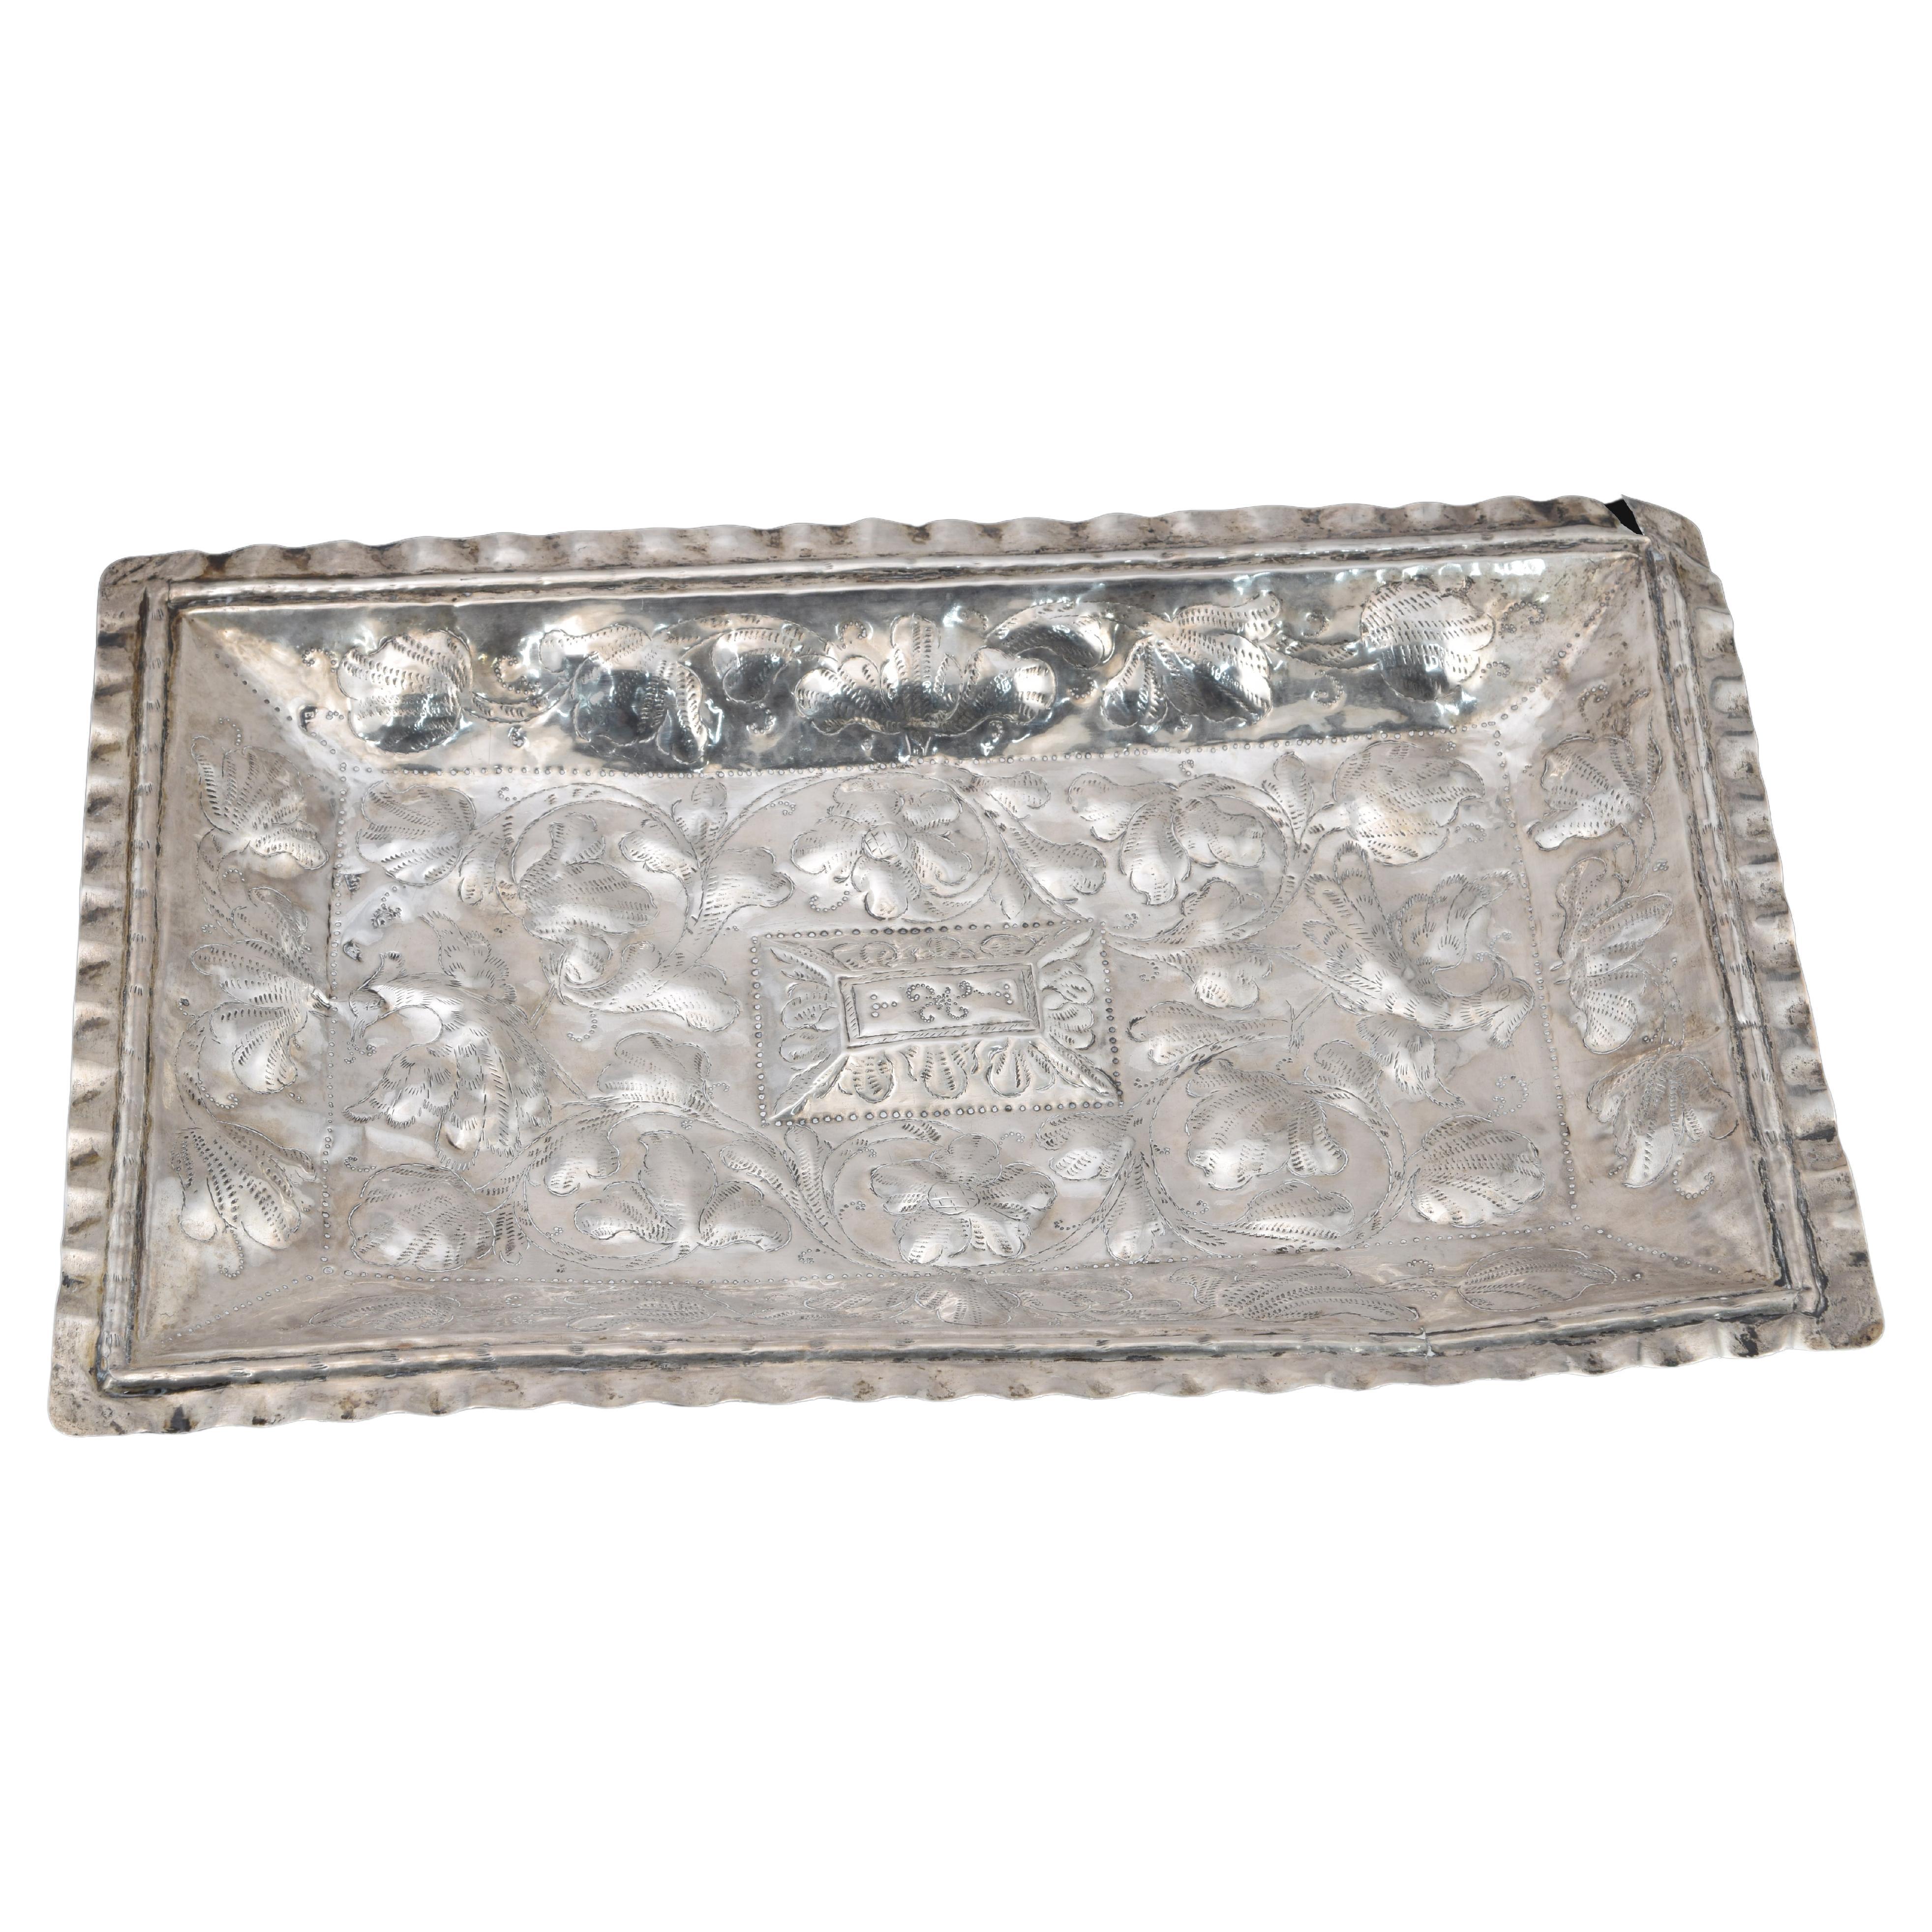 Silver tray. Possibly Spain, 20th century (after antique models). For Sale